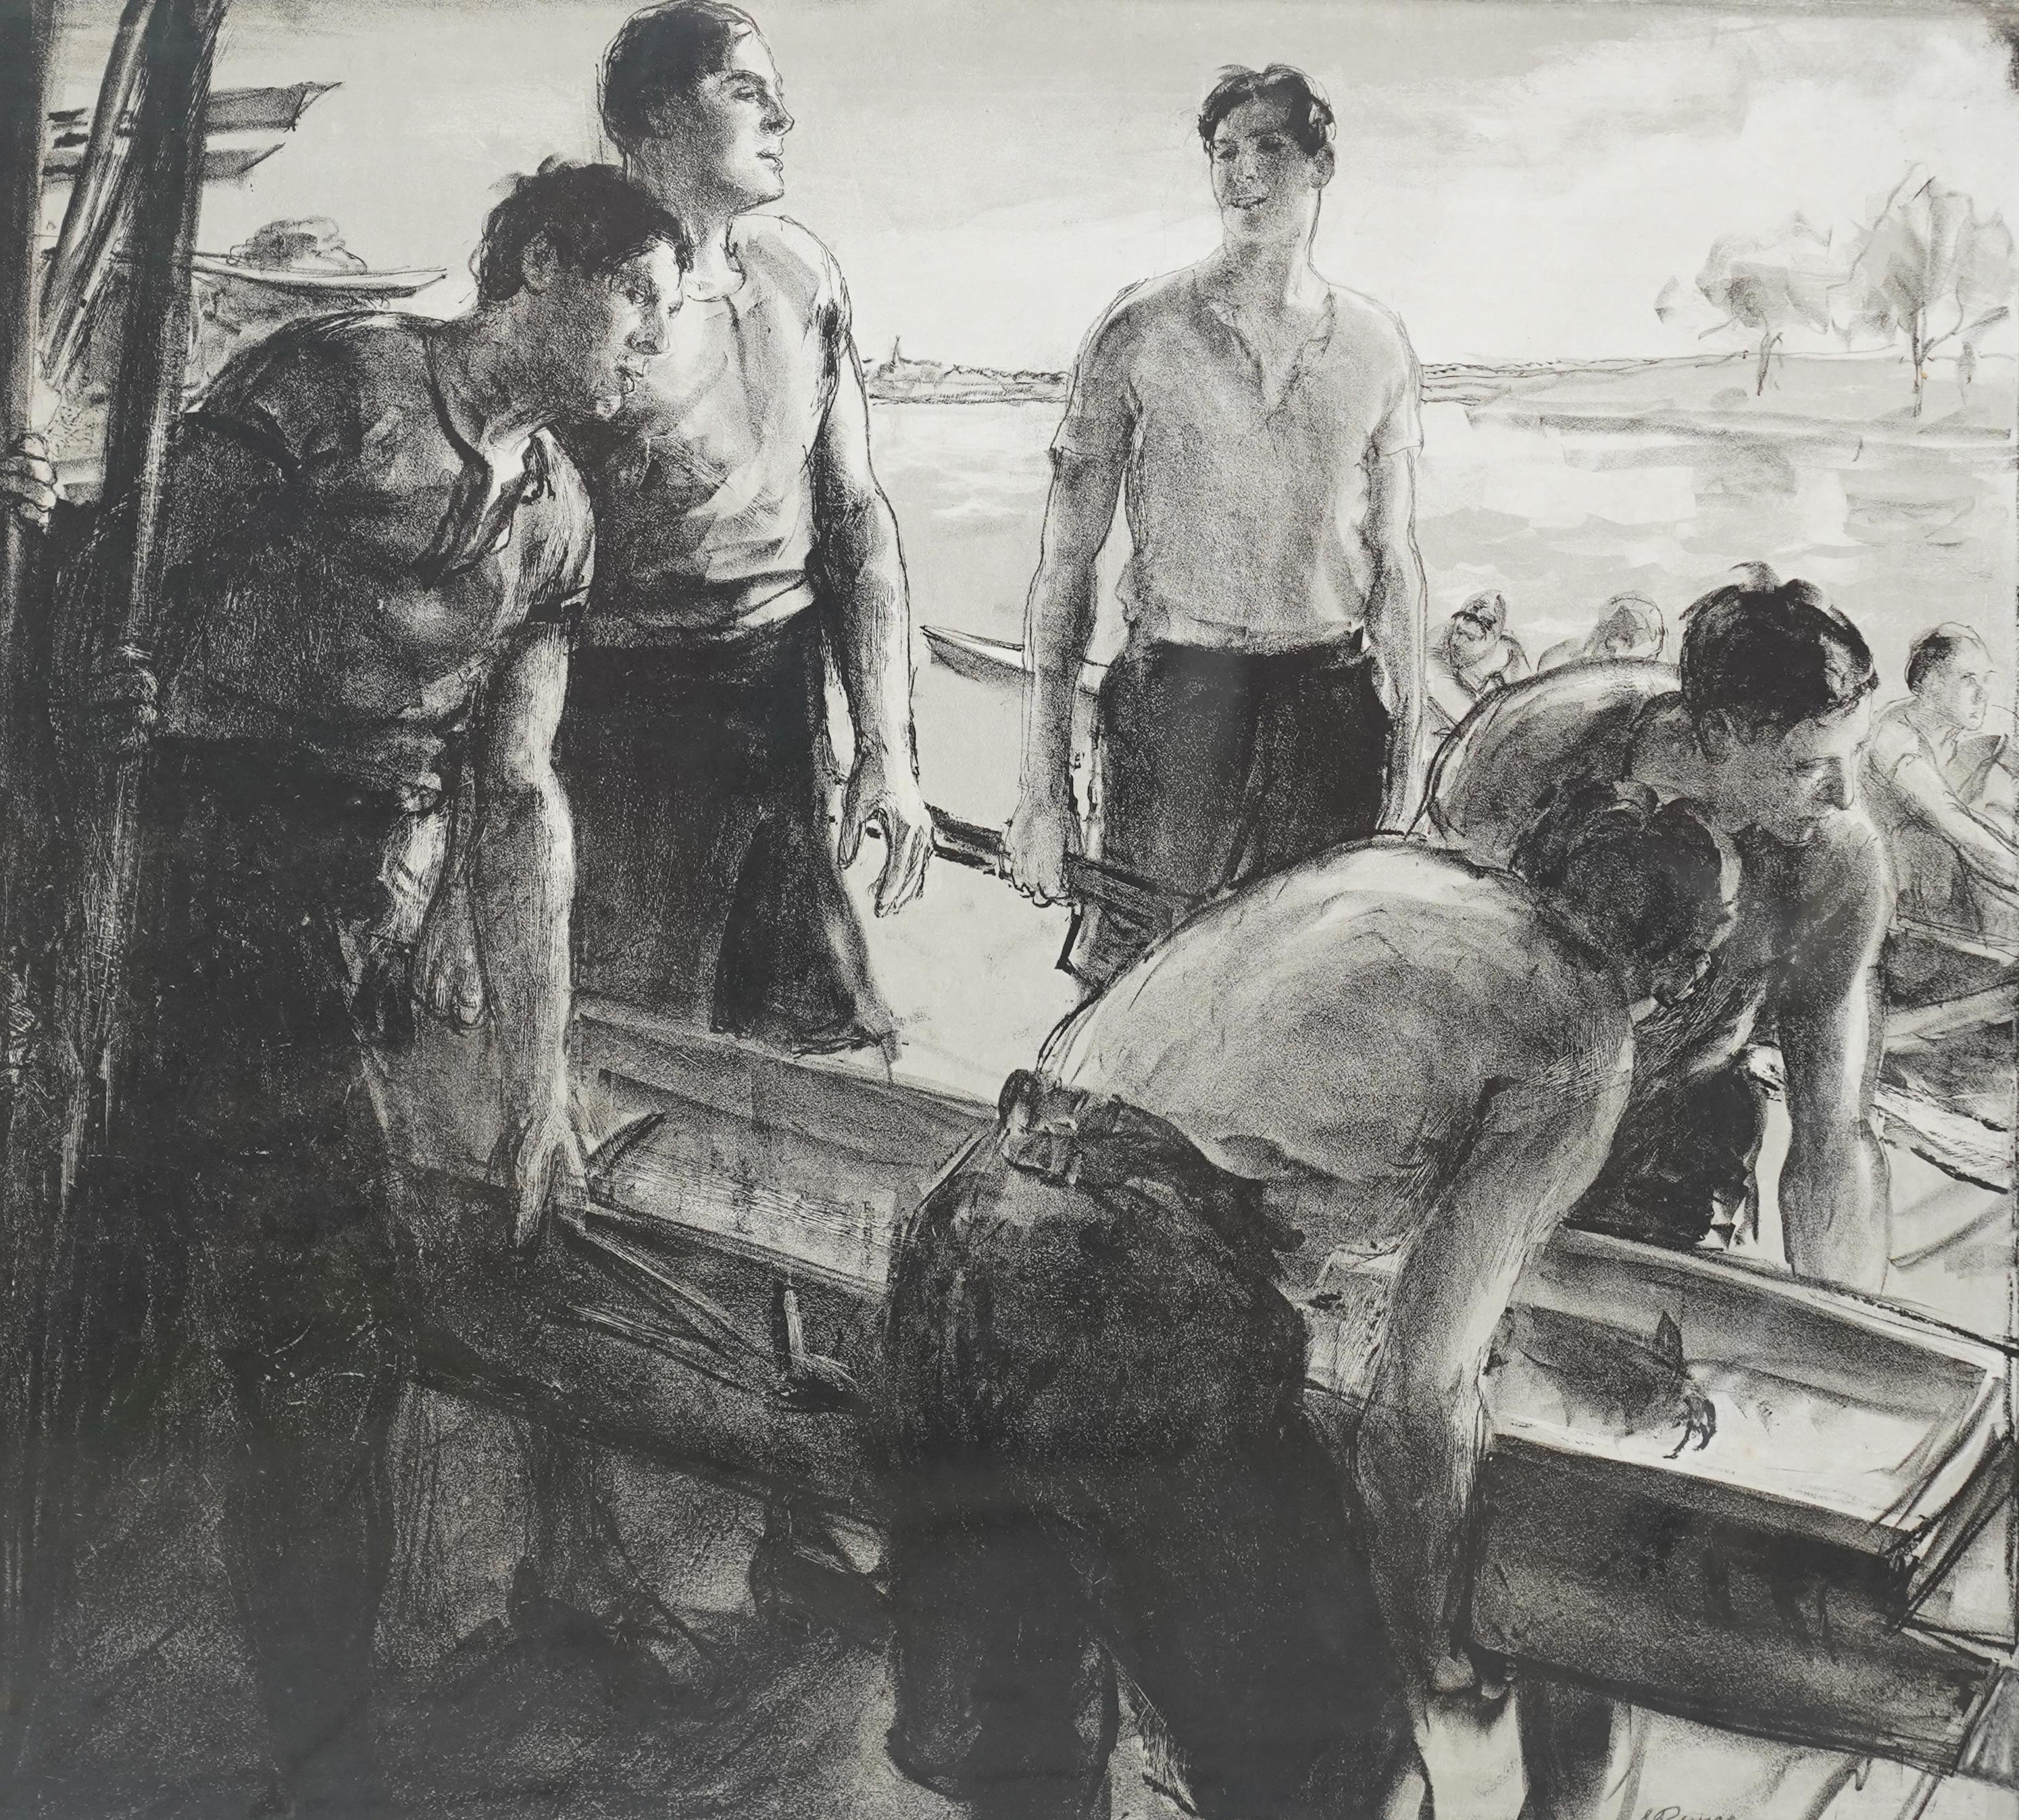 Rowers Before the Race - British 1930's art sport lithograph rowing - Art by Spencer Pryse